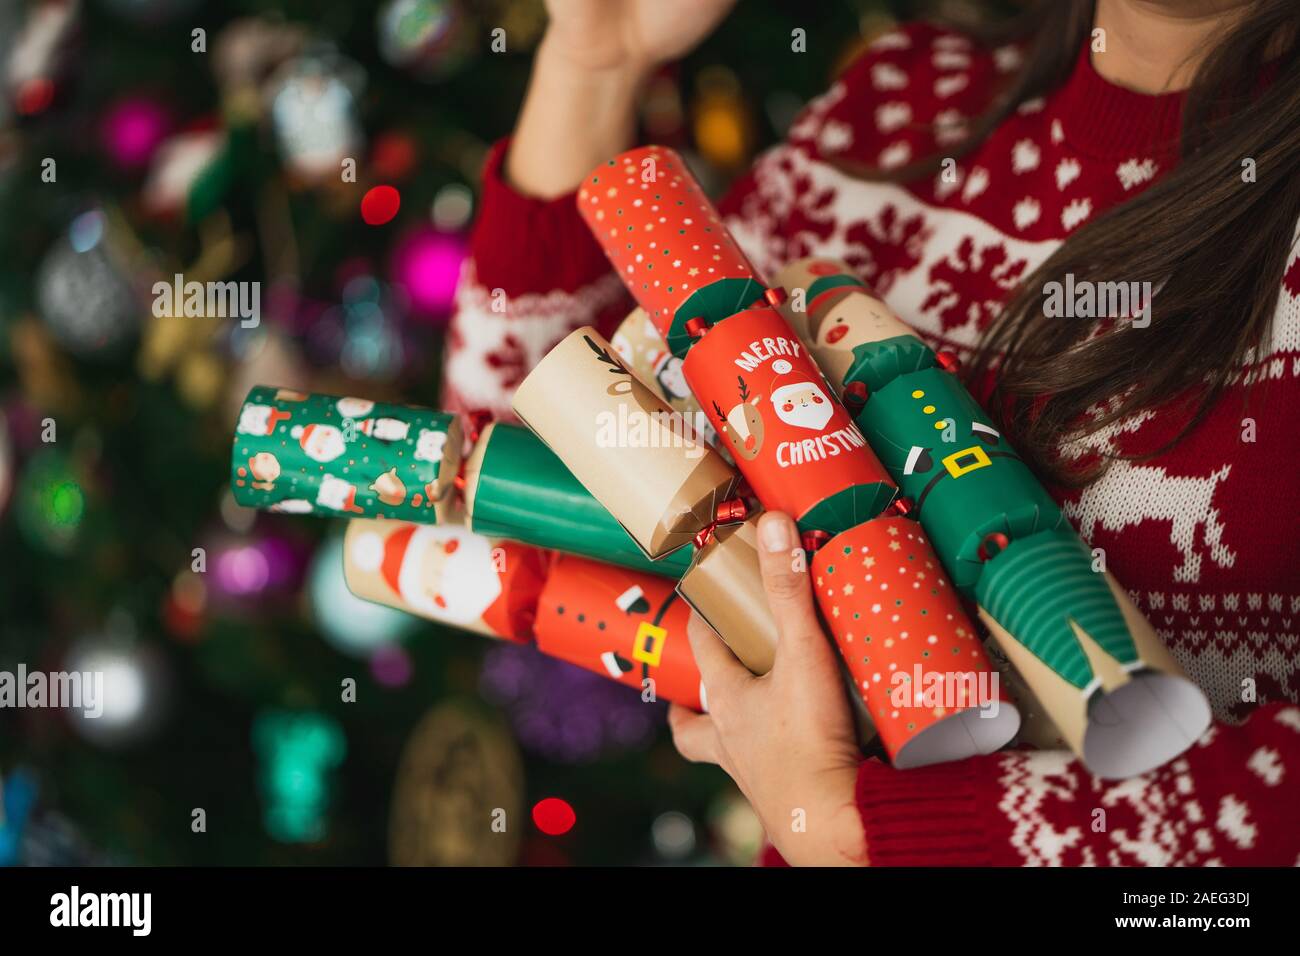 Woman Wearing a Christmas Sweater Holding Some Christmas Cracker on a Lighted Christmas tree. Stock Photo